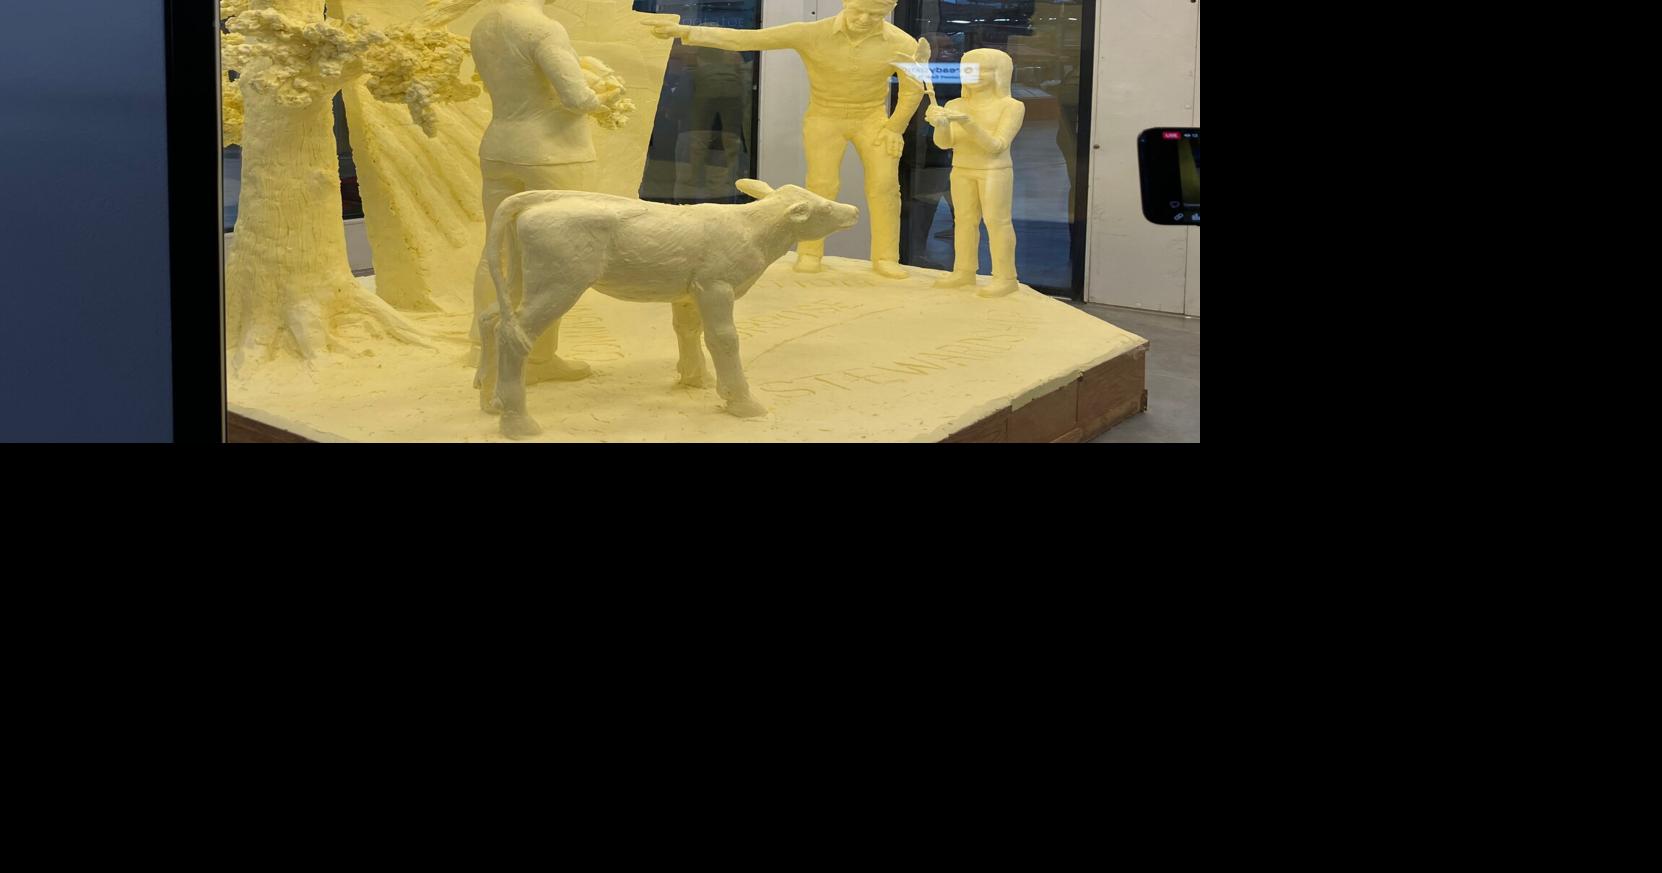 Watch a timelapse of the 2023 Pa. Farm Show butter sculpture being